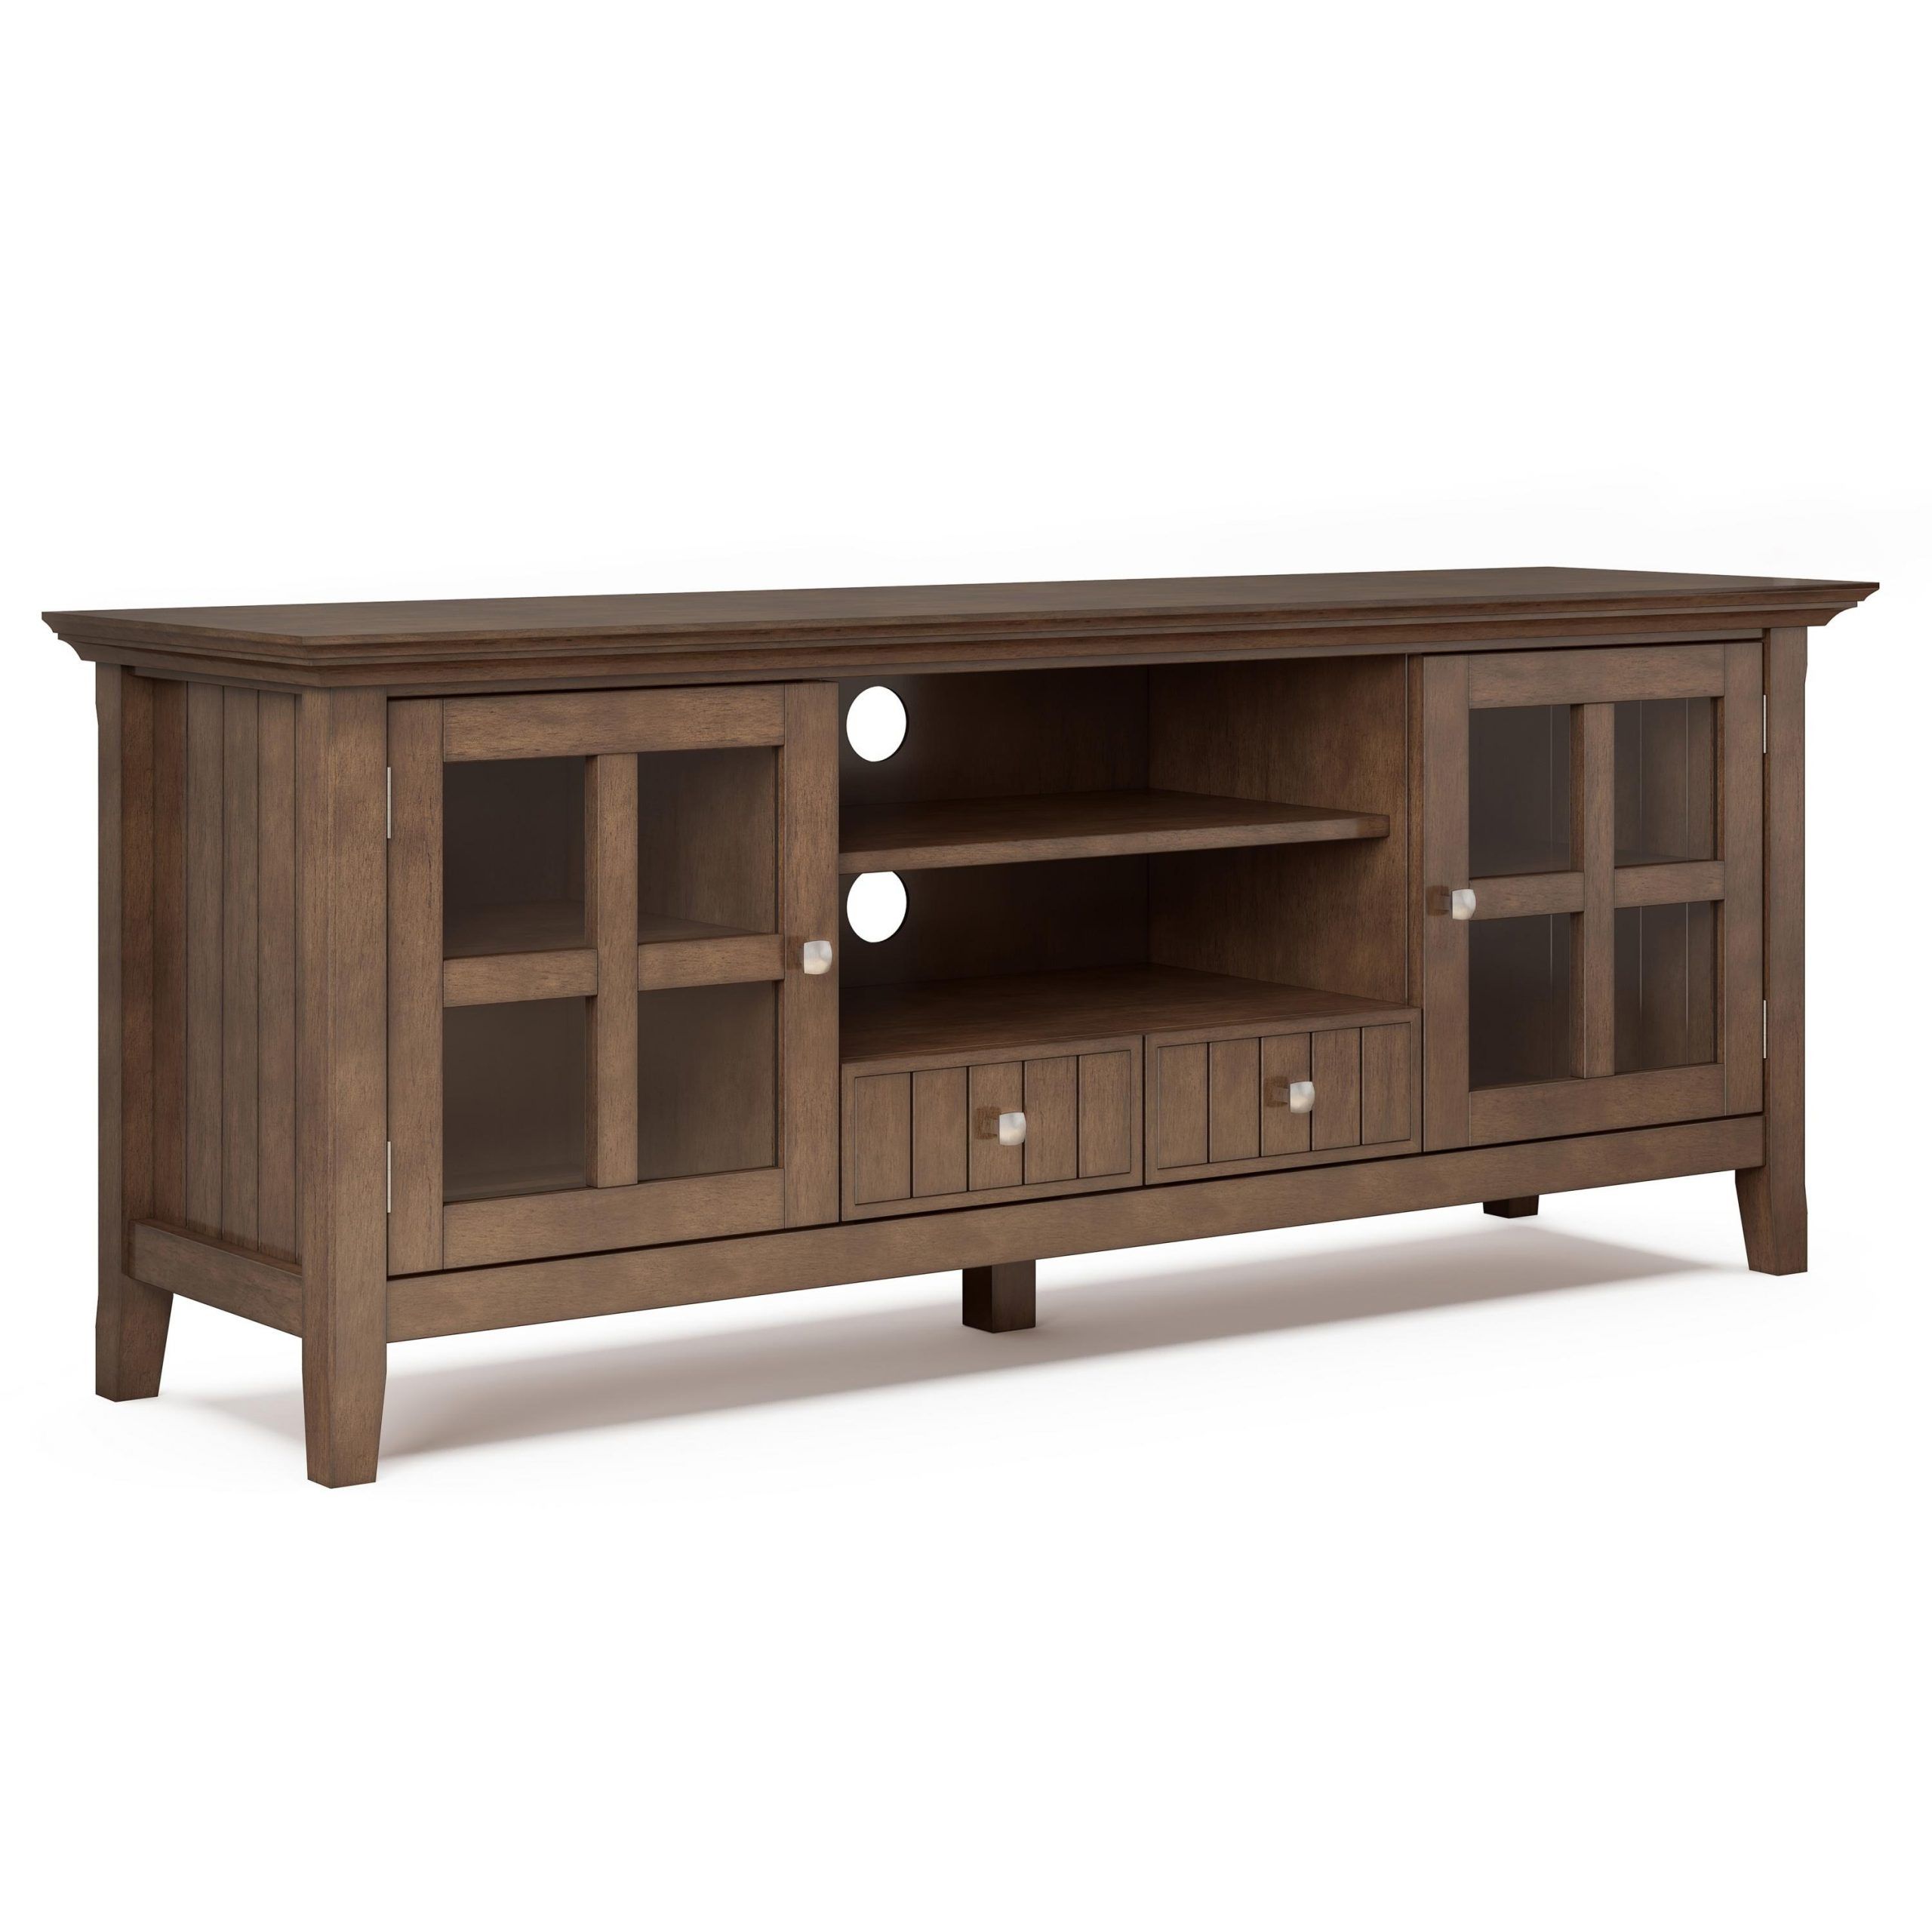 Simpli Home Acadian Solid Wood 60 Inch Wide Rustic Tv Pertaining To Tribeca Oak Tv Media Stand (View 5 of 15)